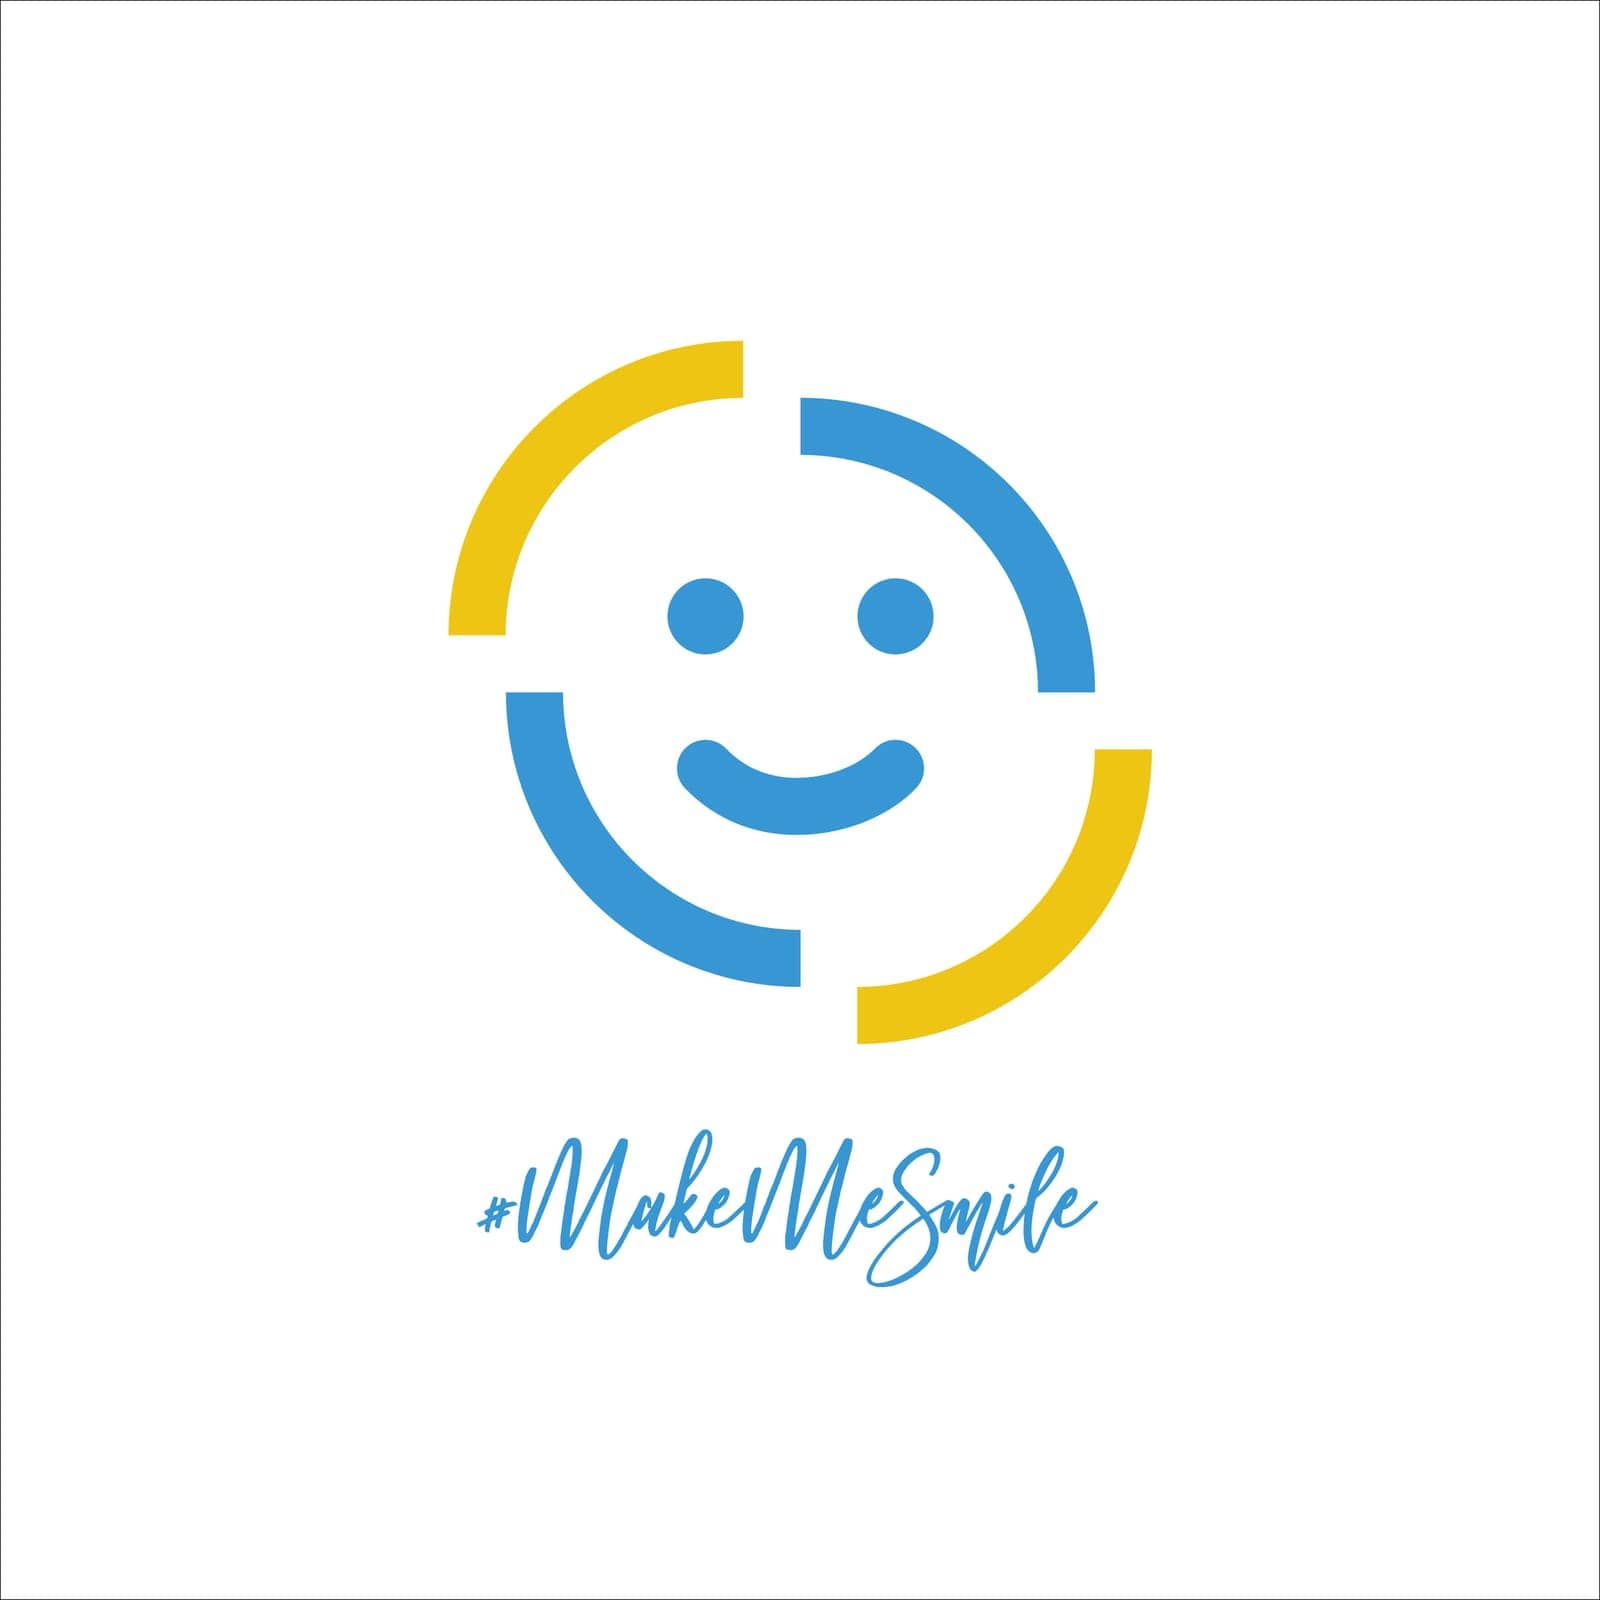 Happy smile face abstract design logo template in blue and yellow colors. Make me smile motivation. emotion logo. Stock vector illustration isolated